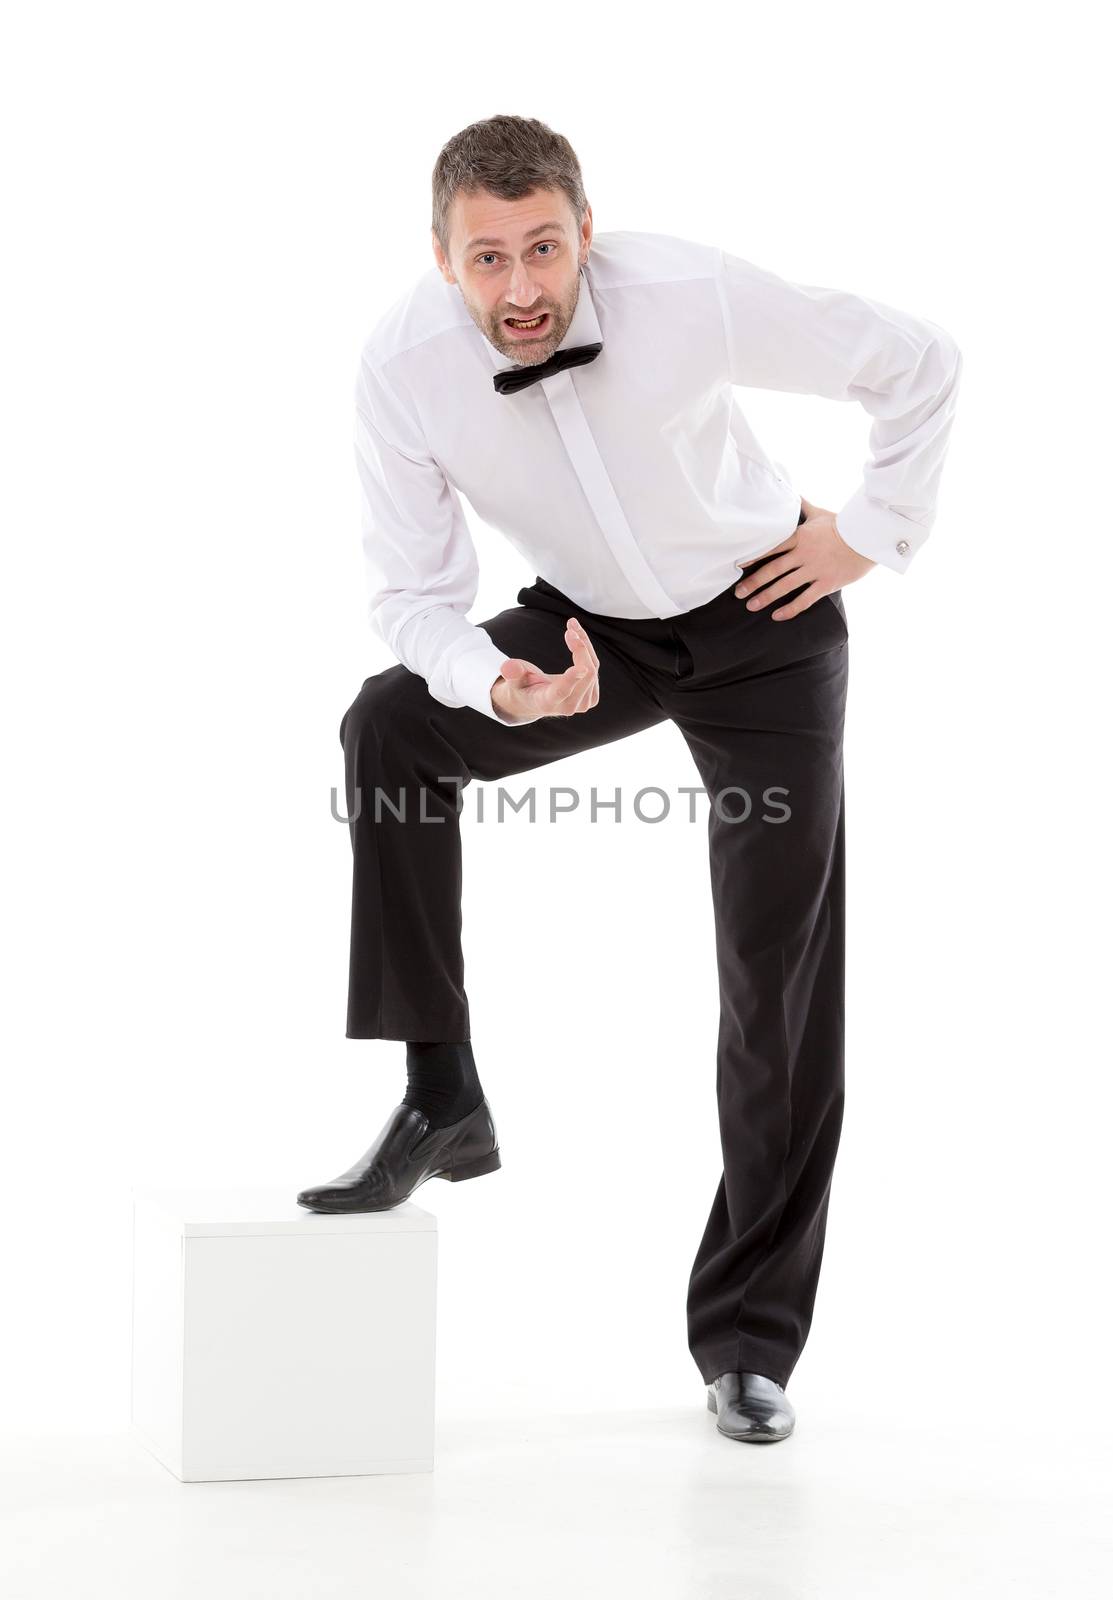 Stylish man in a bow tie leaning on a low pedestal talking to the camera while looking up and gesturing with his hand